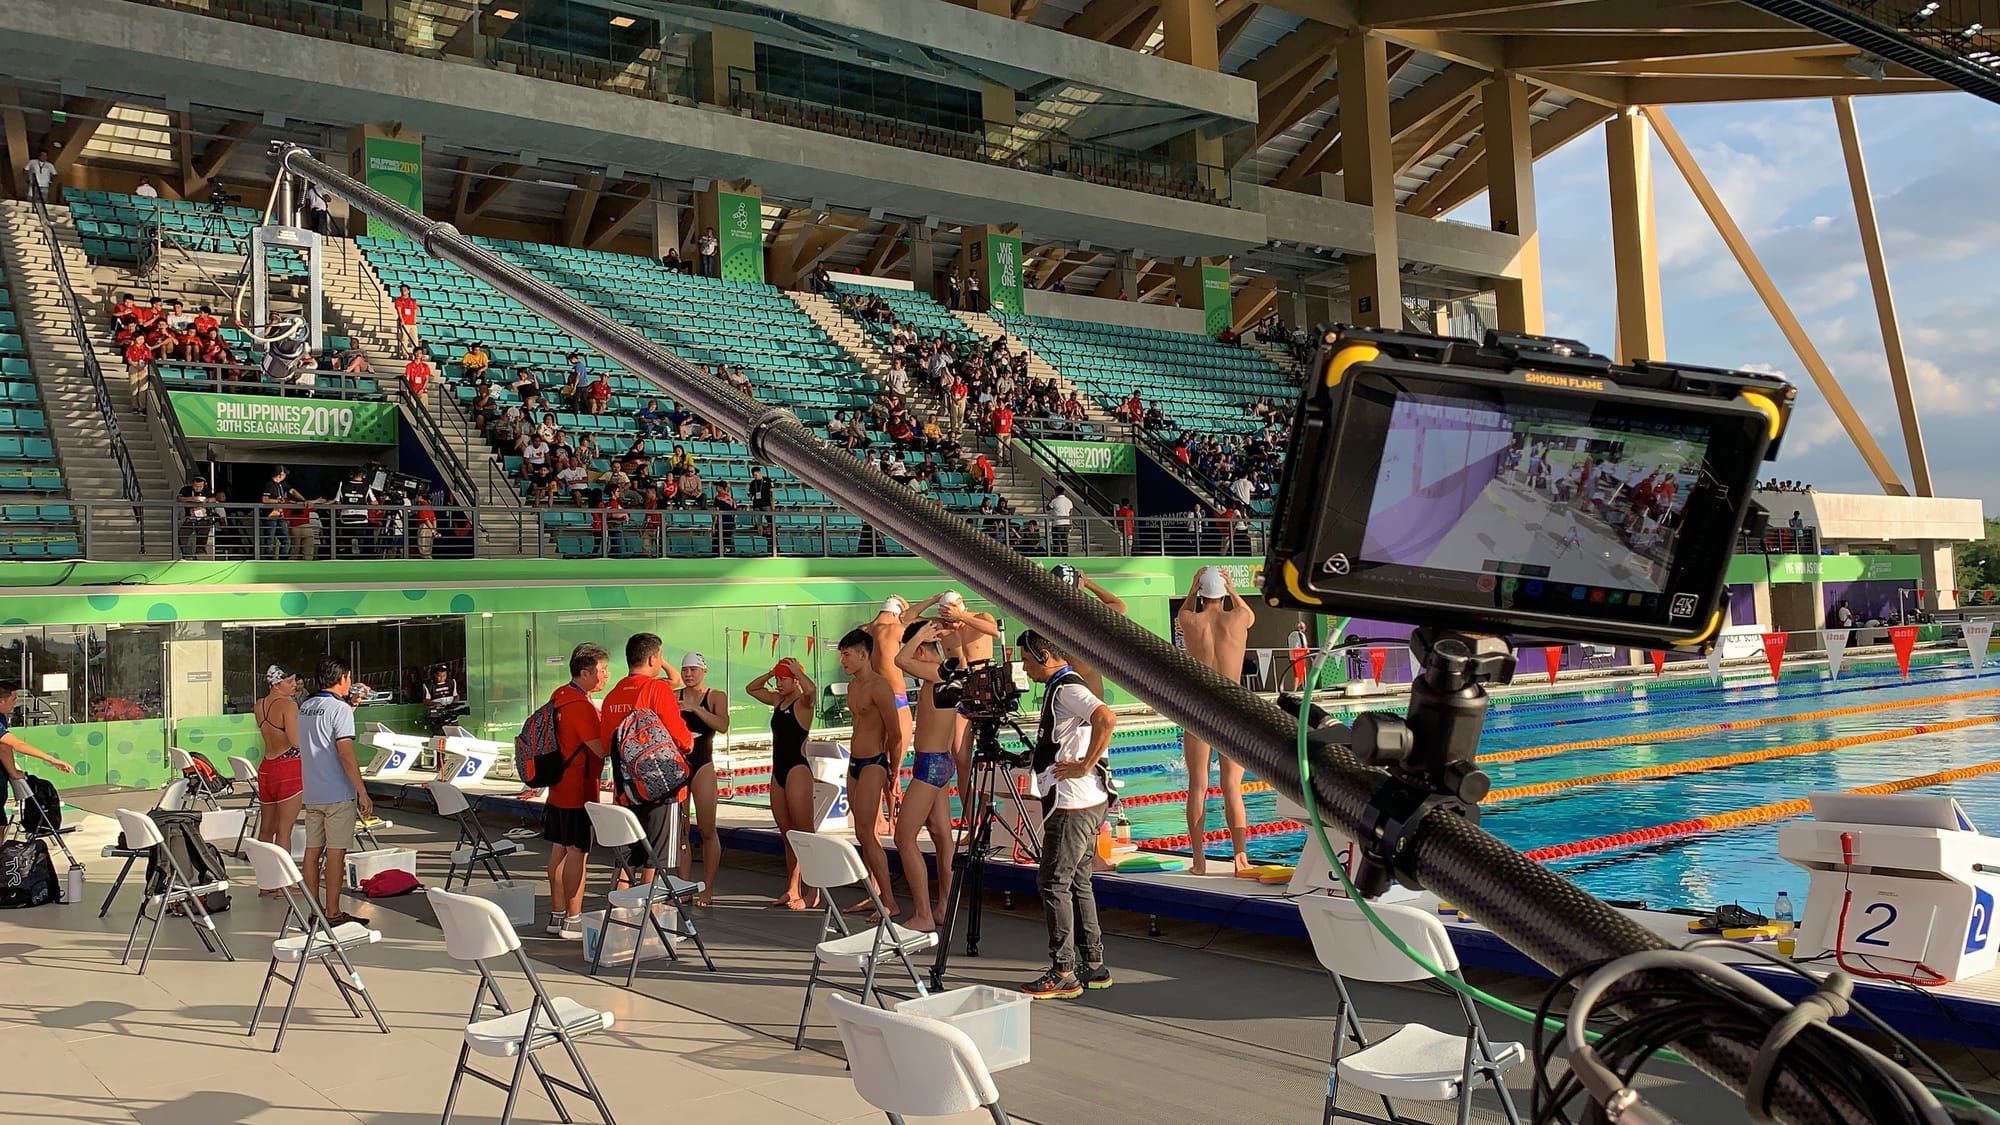 SAE Games Philippines 2019. Polecam for swimming.